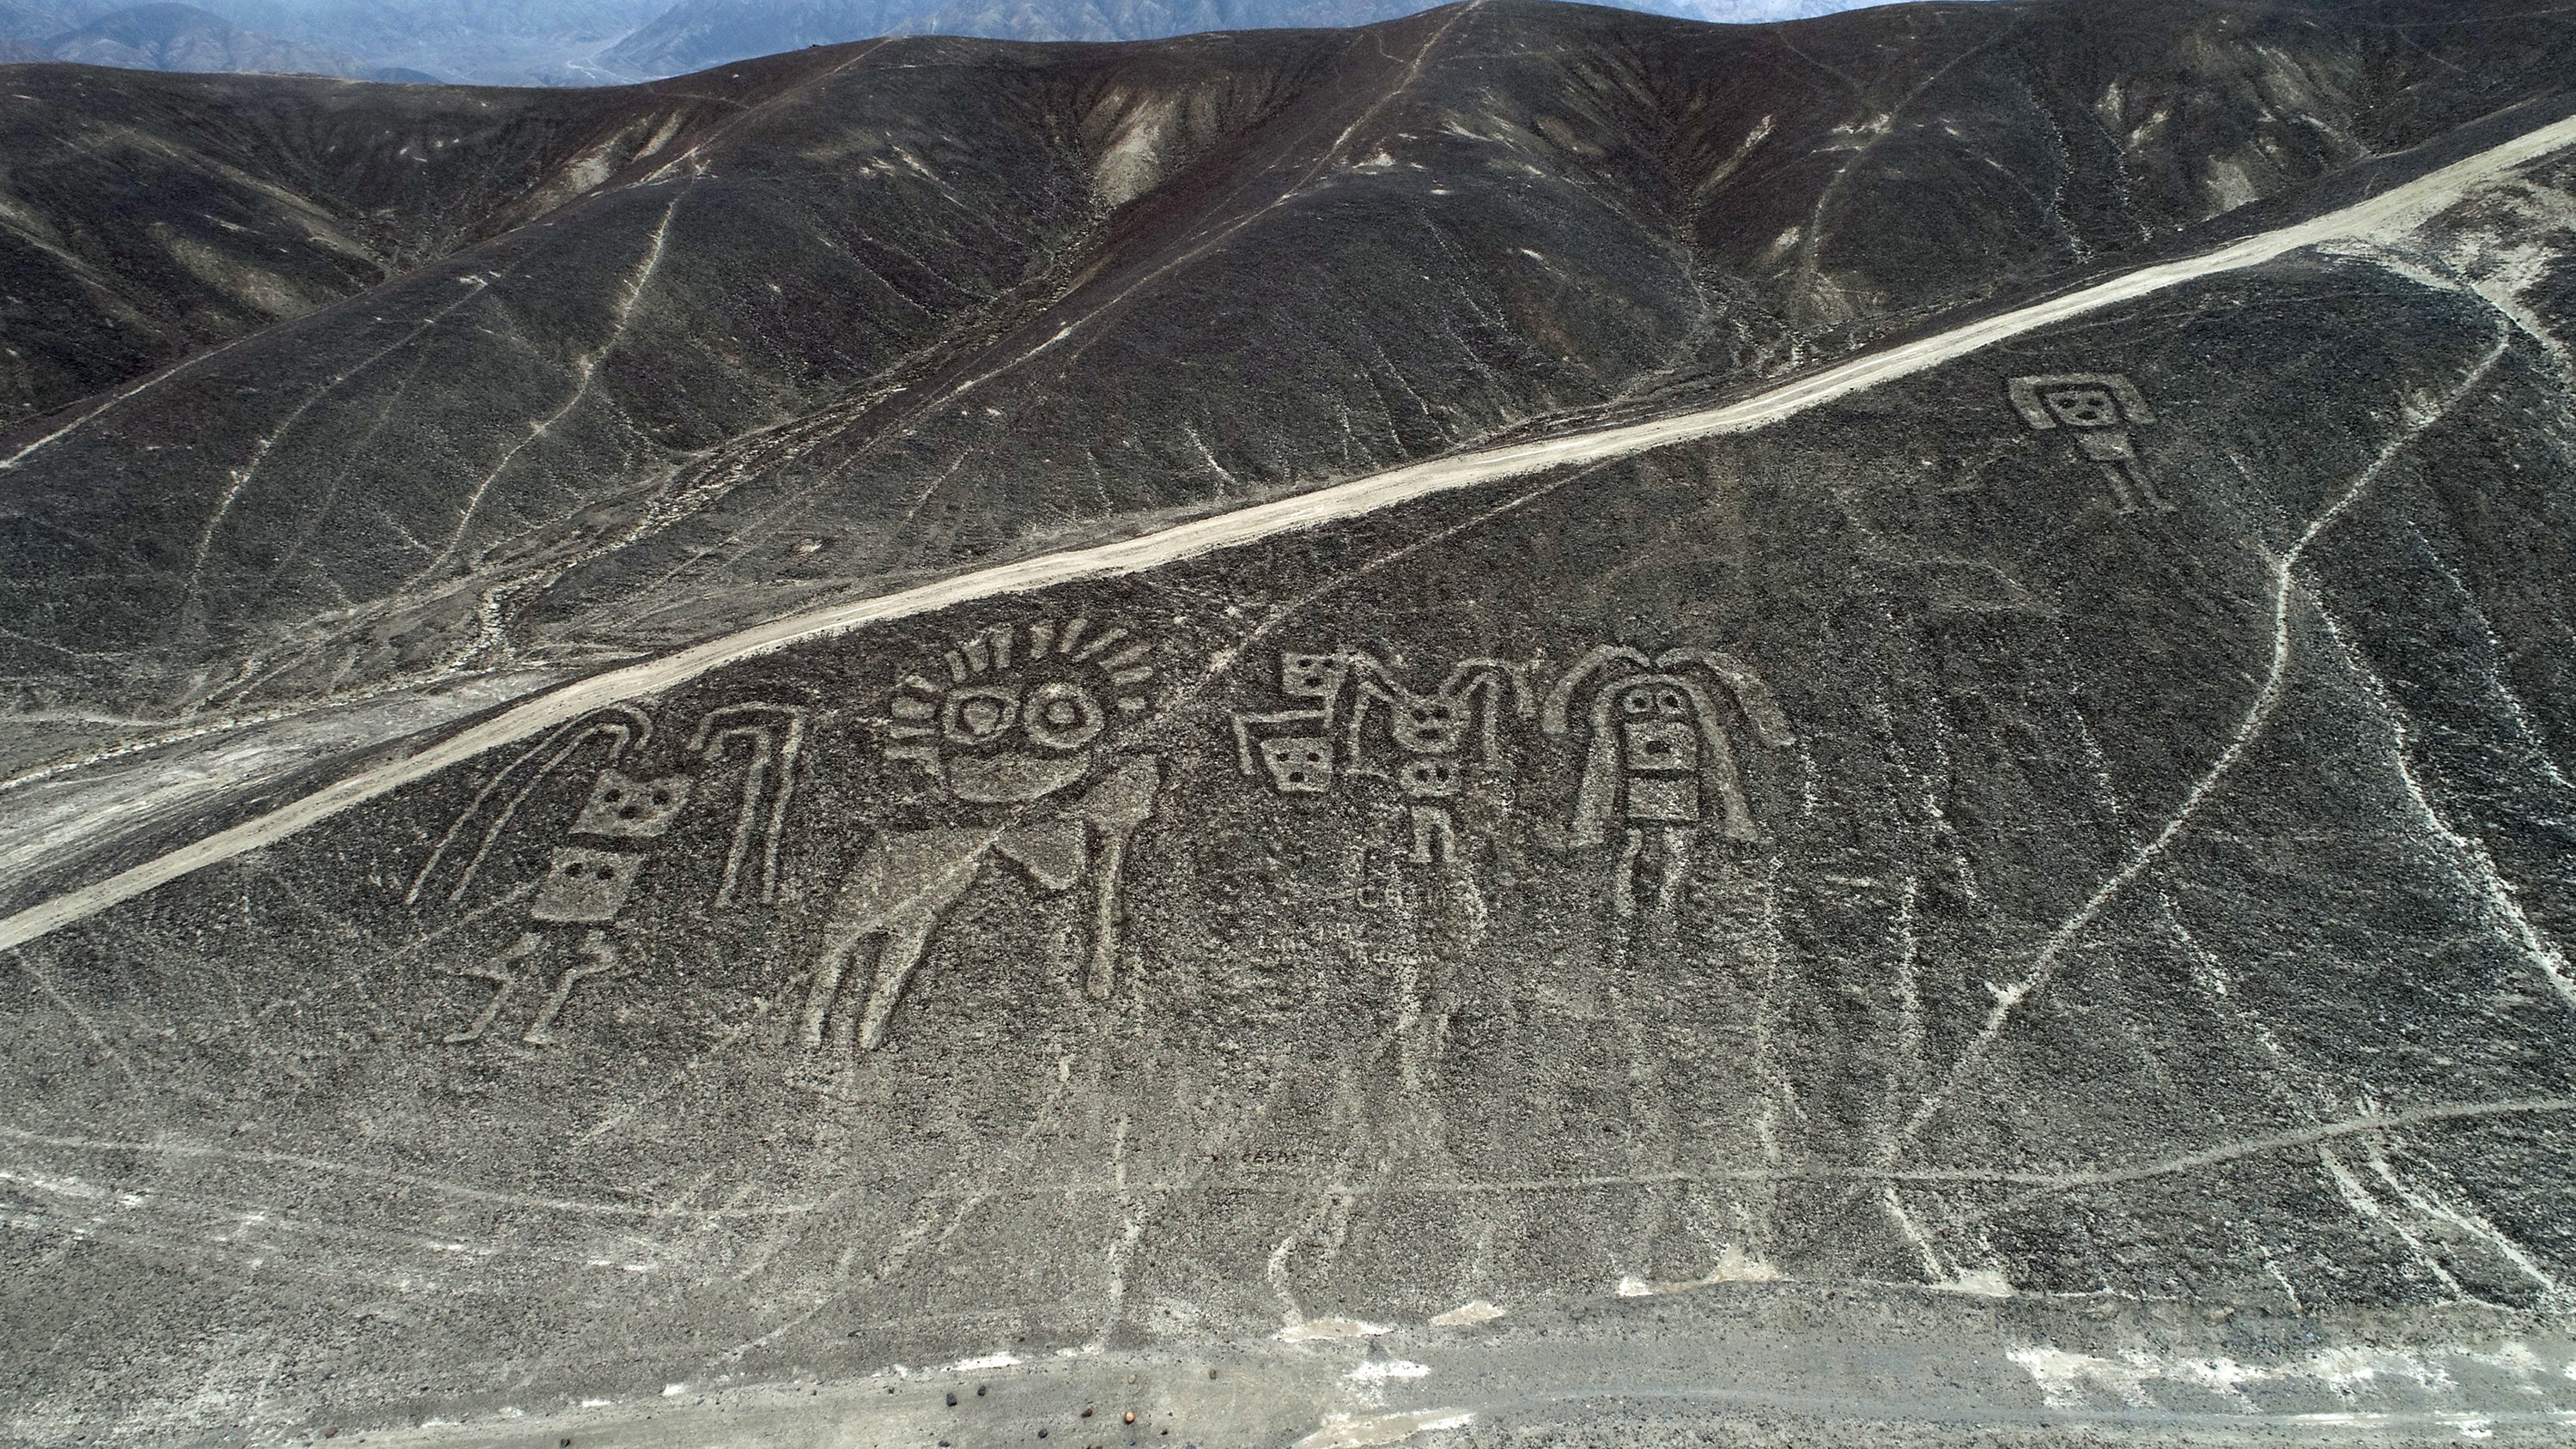 Nazca Lines in Peru: How to visit these mysterious geoglyphs in the sand | CNN Travel